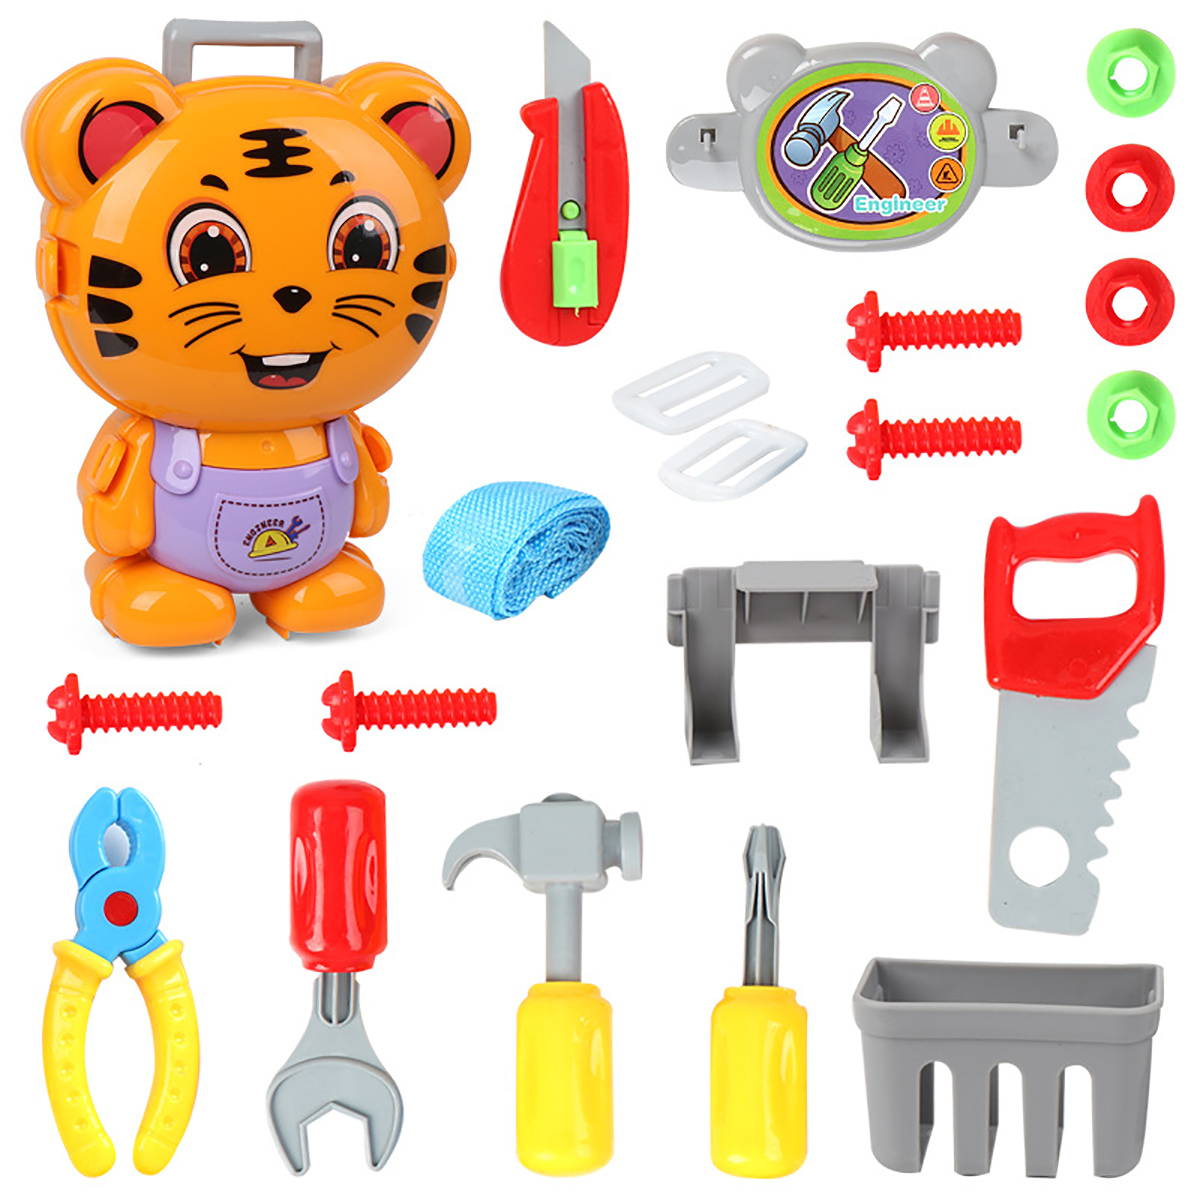 Simulation-Kids-Kitchen-Cooking-Tools-Doctors-Makeup-Playing-Education-Pretend-Toy-Set-with-Carrying-1725293-7